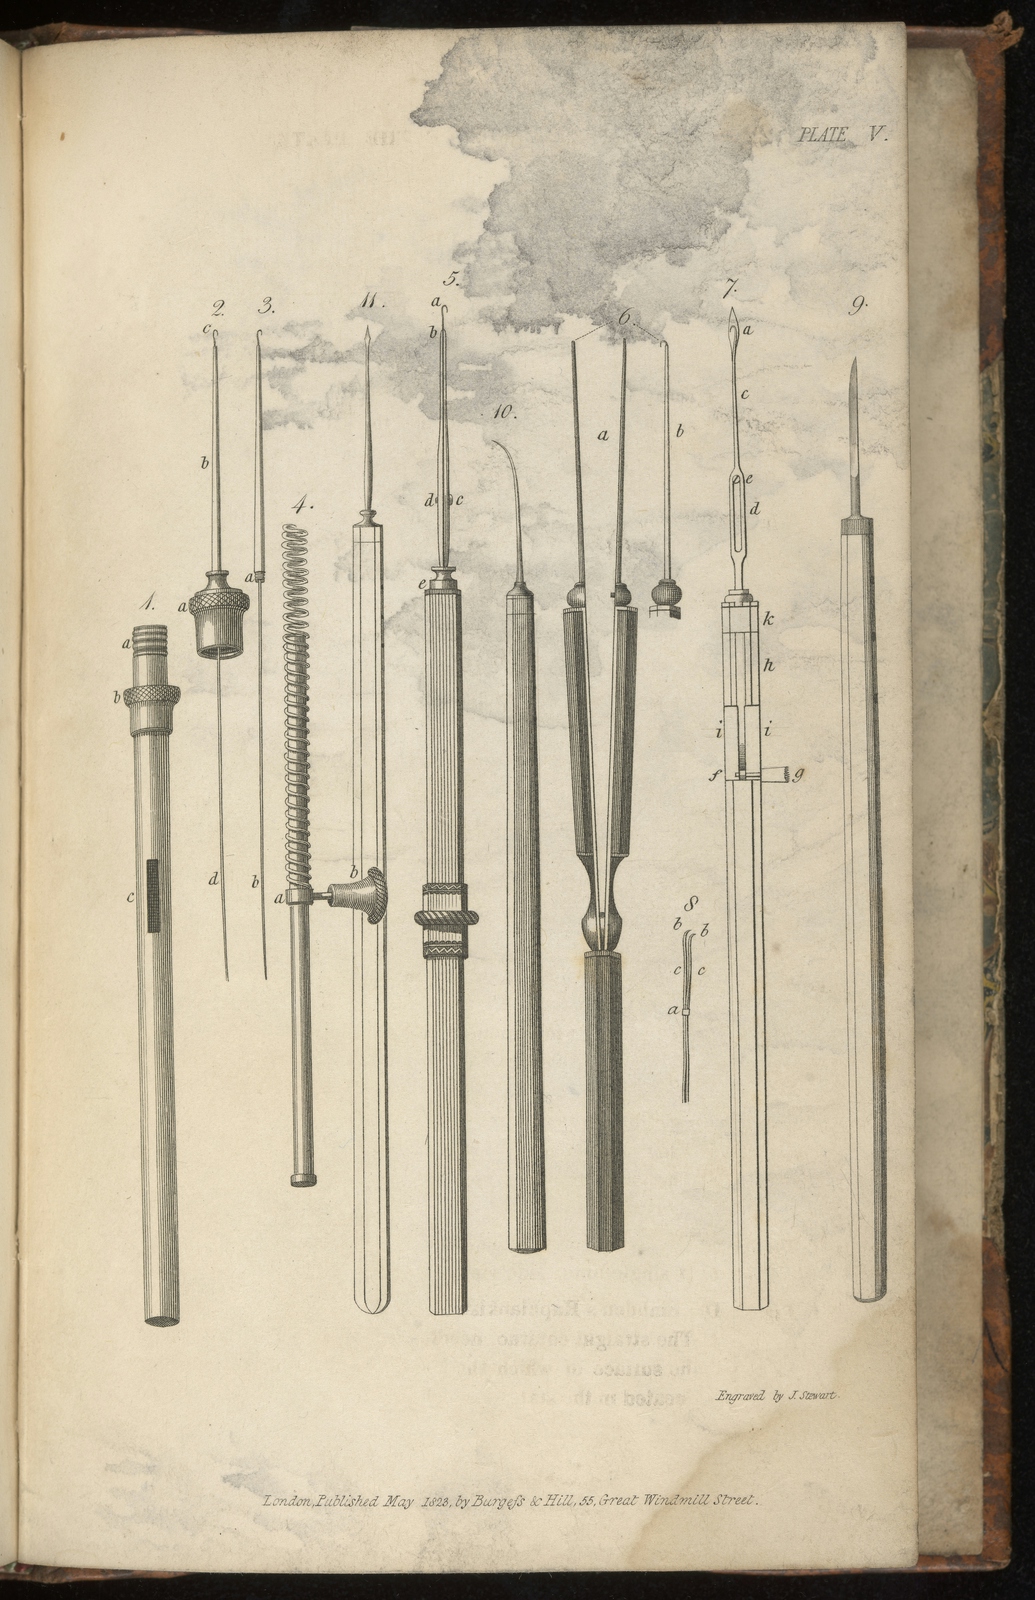 Black and white engraving showing tools used to perform eye surgery in the 19th century.